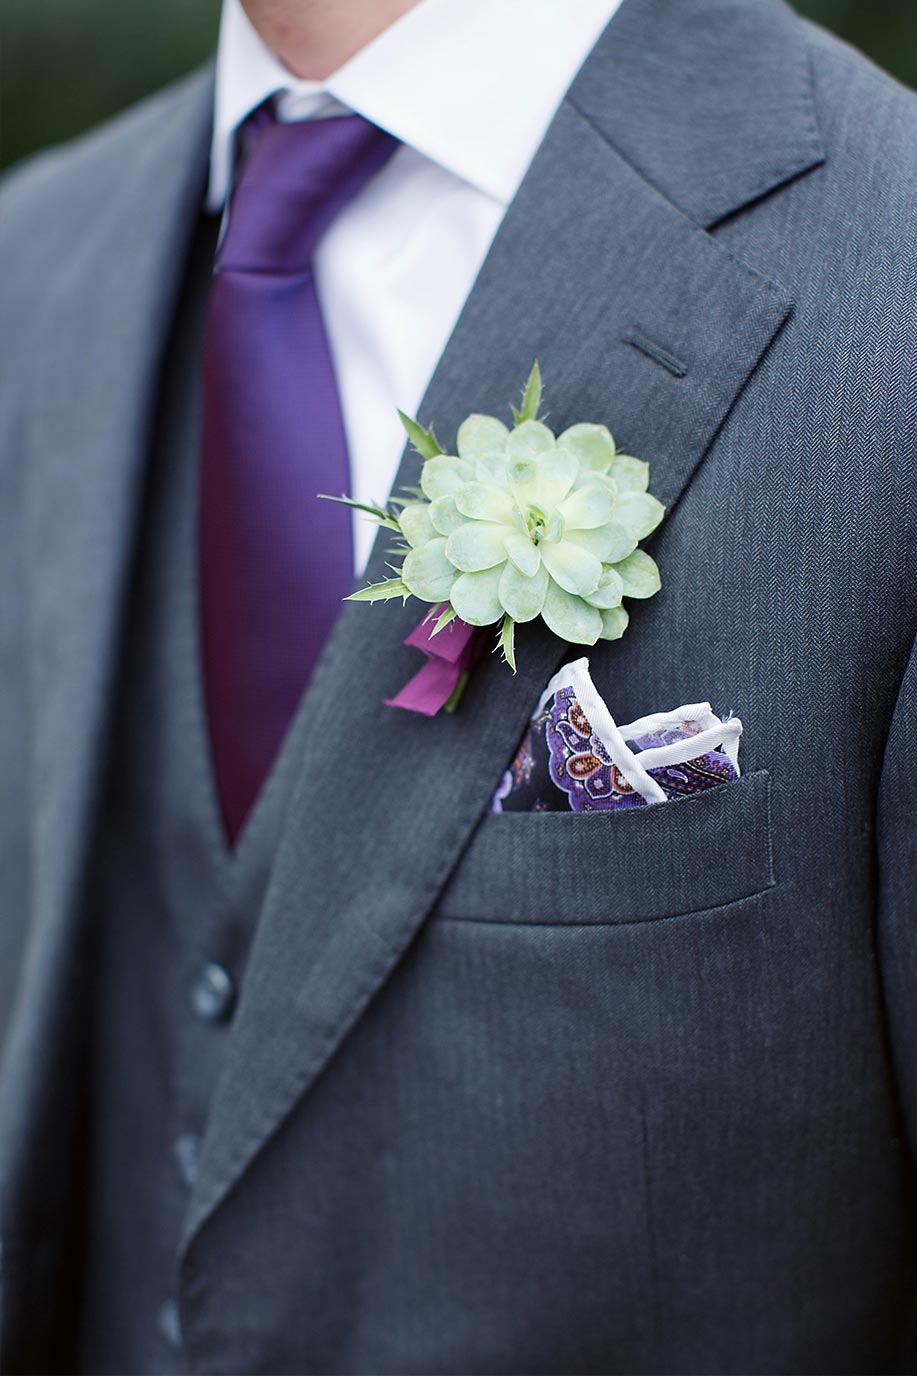 Groom's succulent boutonniere with purple tie and gray suit